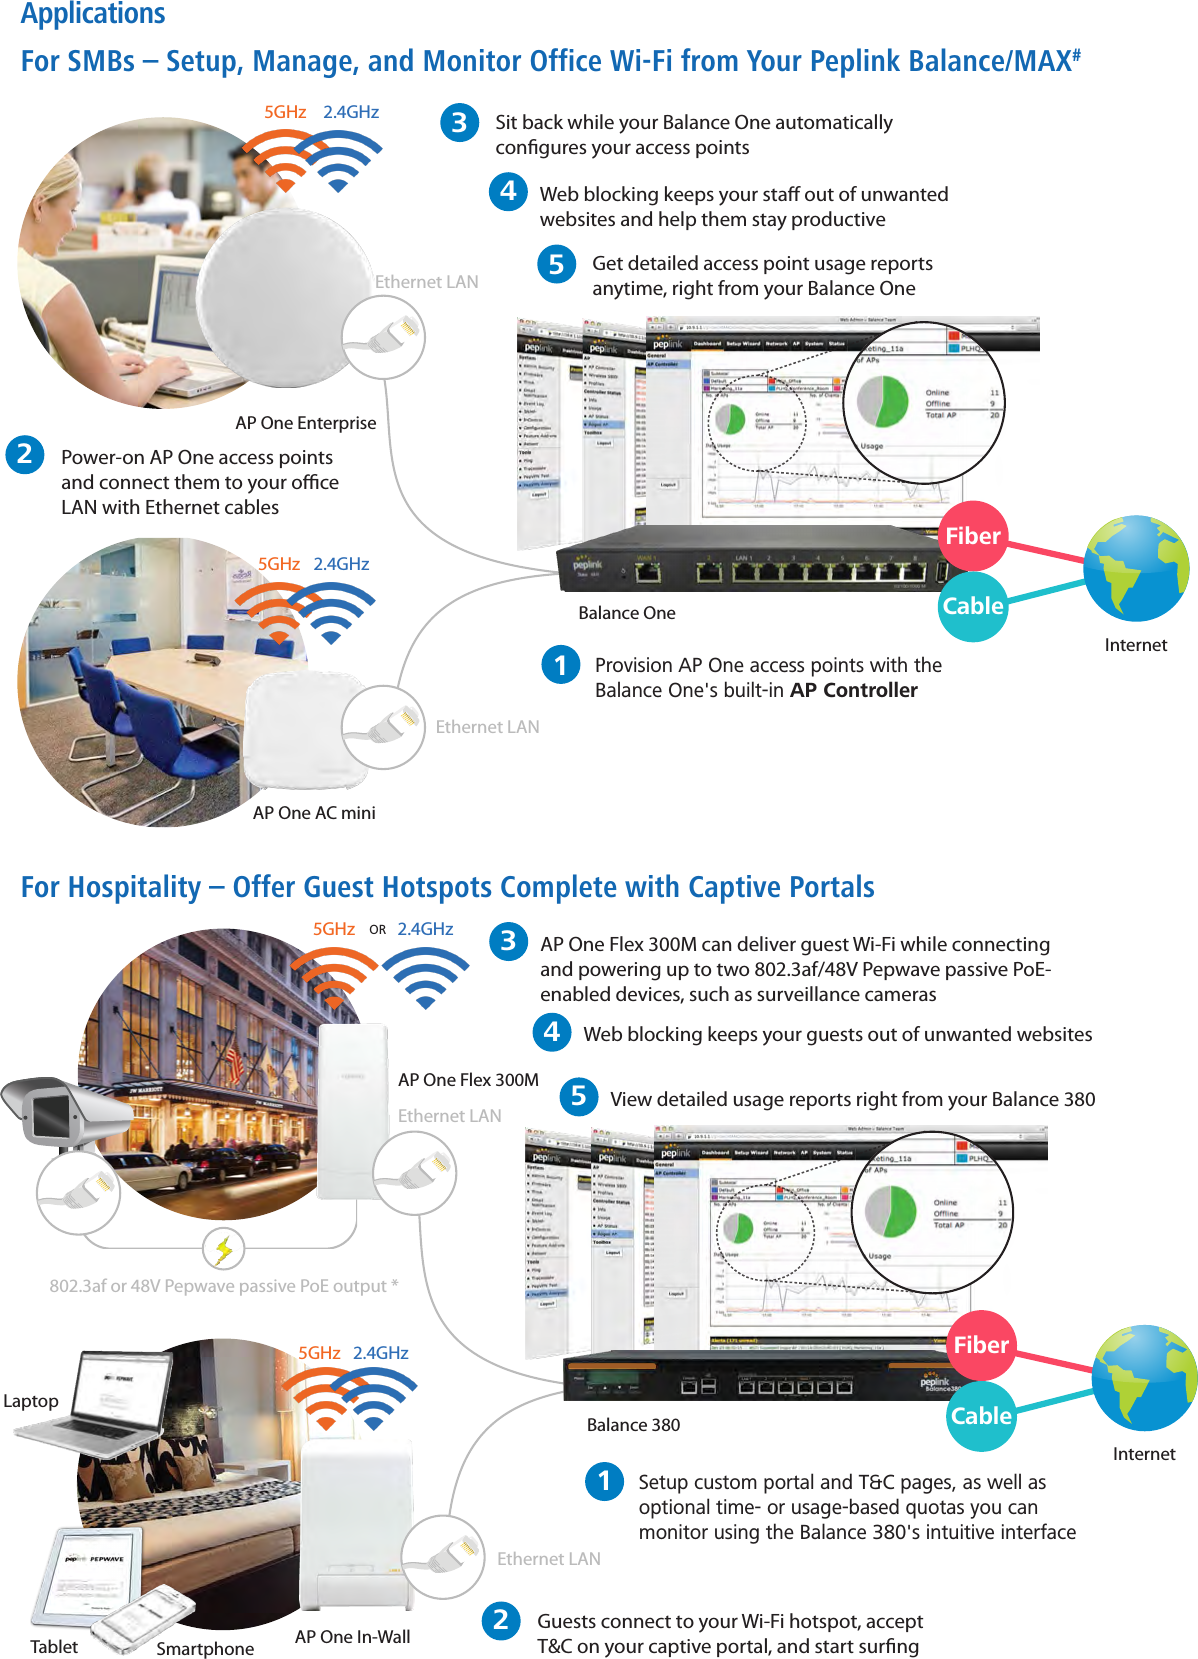 ApplicationsFor SMBs – Setup, Manage, and Monitor Office Wi-Fi from Your Peplink Balance/MAX#For Hospitality – Offer Guest Hotspots Complete with Captive PortalsAP One In-WallAP One Flex 300M5GHz 2.4GHzOREthernet LAN View detailed usage reports right from your Balance 3802Setup custom portal and T&amp;C pages, as well as optional time- or usage-based quotas you can monitor using the Balance 380&apos;s intuitive interface1Guests connect to your Wi-Fi hotspot, accept T&amp;C on your captive portal, and start surngBalance 380Laptop5Tablet Smartphone802.3af or 48V Pepwave passive PoE output *FiberCableInternetSit back while your Balance One automatically congures your access points2Provision AP One access points with the Balance One&apos;s built-in AP ControllerAP One Enterprise1Ethernet LANPower-on AP One access points and connect them to your oce LAN with Ethernet cablesBalance One5GHz 2.4GHz 3Get detailed access point usage reports anytime, right from your Balance One5FiberCableInternetAP One Flex 300M can deliver guest Wi-Fi while connecting and powering up to two 802.3af/48V Pepwave passive PoE- enabled devices, such as surveillance cameras3Ethernet LAN5GHz 2.4GHz* Requires 48V Pepwave passive PoE input, available separately.Web blocking keeps your guests out of unwanted websites4Web blocking keeps your sta out of unwanted websites and help them stay productive4AP One AC mini5GHz 2.4GHzEthernet LAN